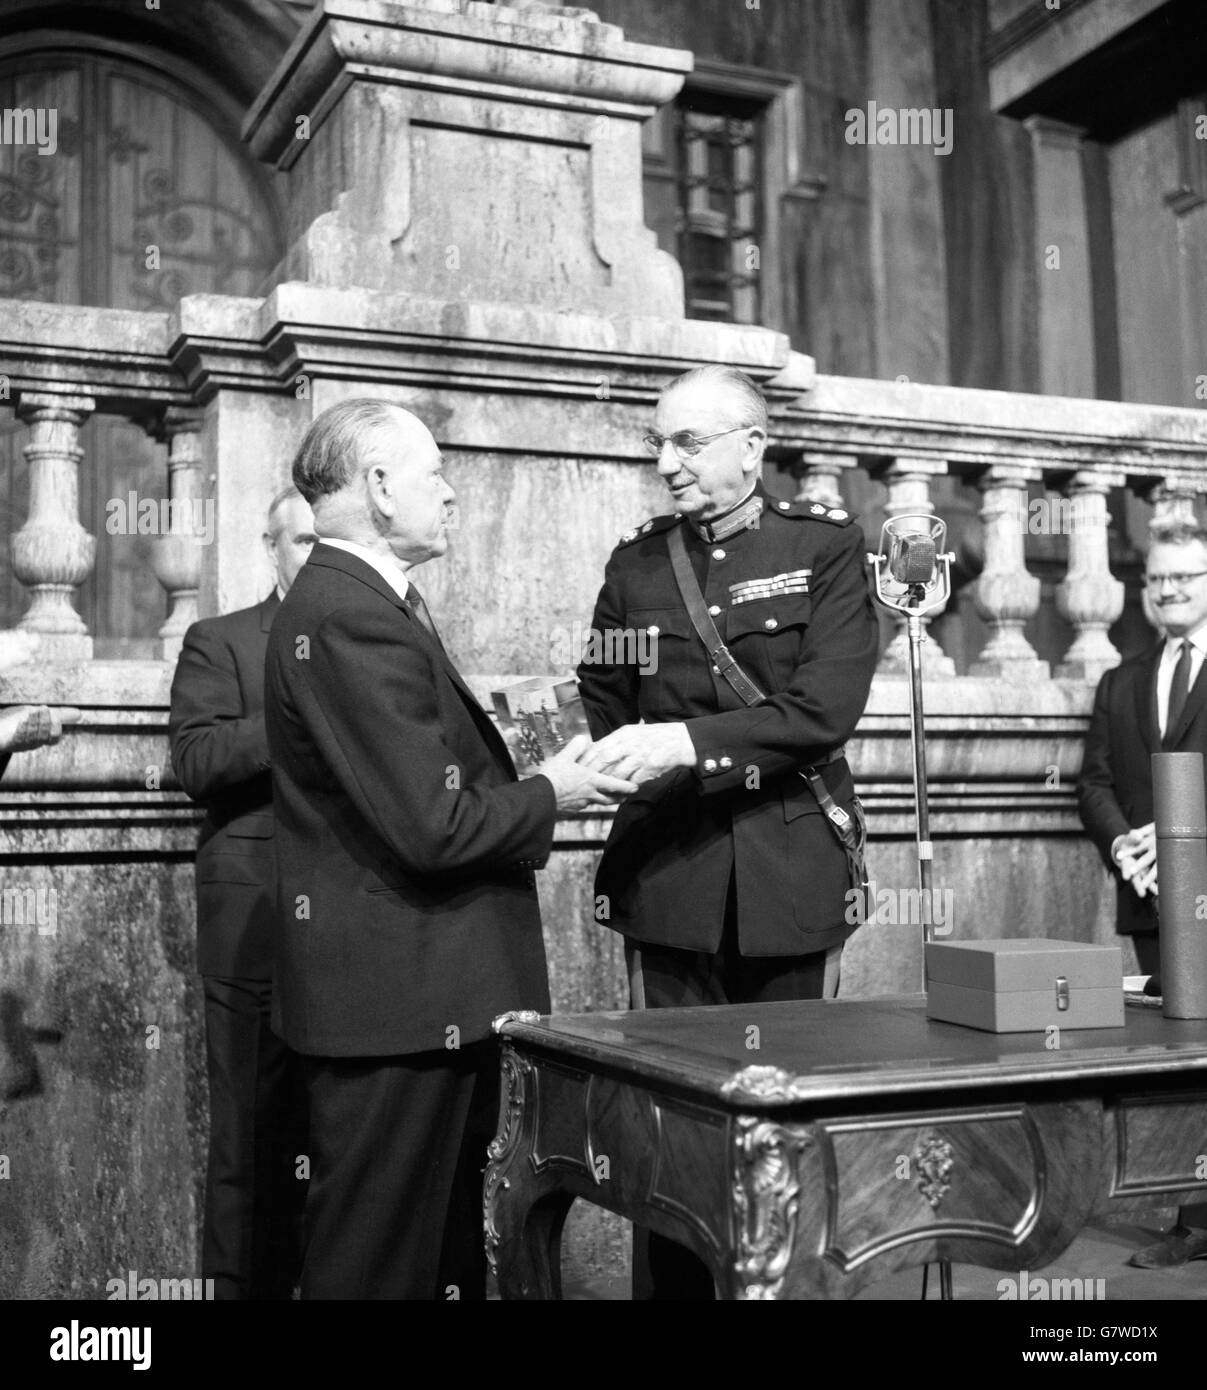 Arthur Banks, Construction Manager and the longest serving employee of Hammer Films, receives the Queen's Award to Industry from Sir Henry Ford, Lord Lieutenant of Buckinghamshire. The film company's award was presented at Pinewood Studios, on the set of their latest film Dracula Has Risen from the Grave. Stock Photo